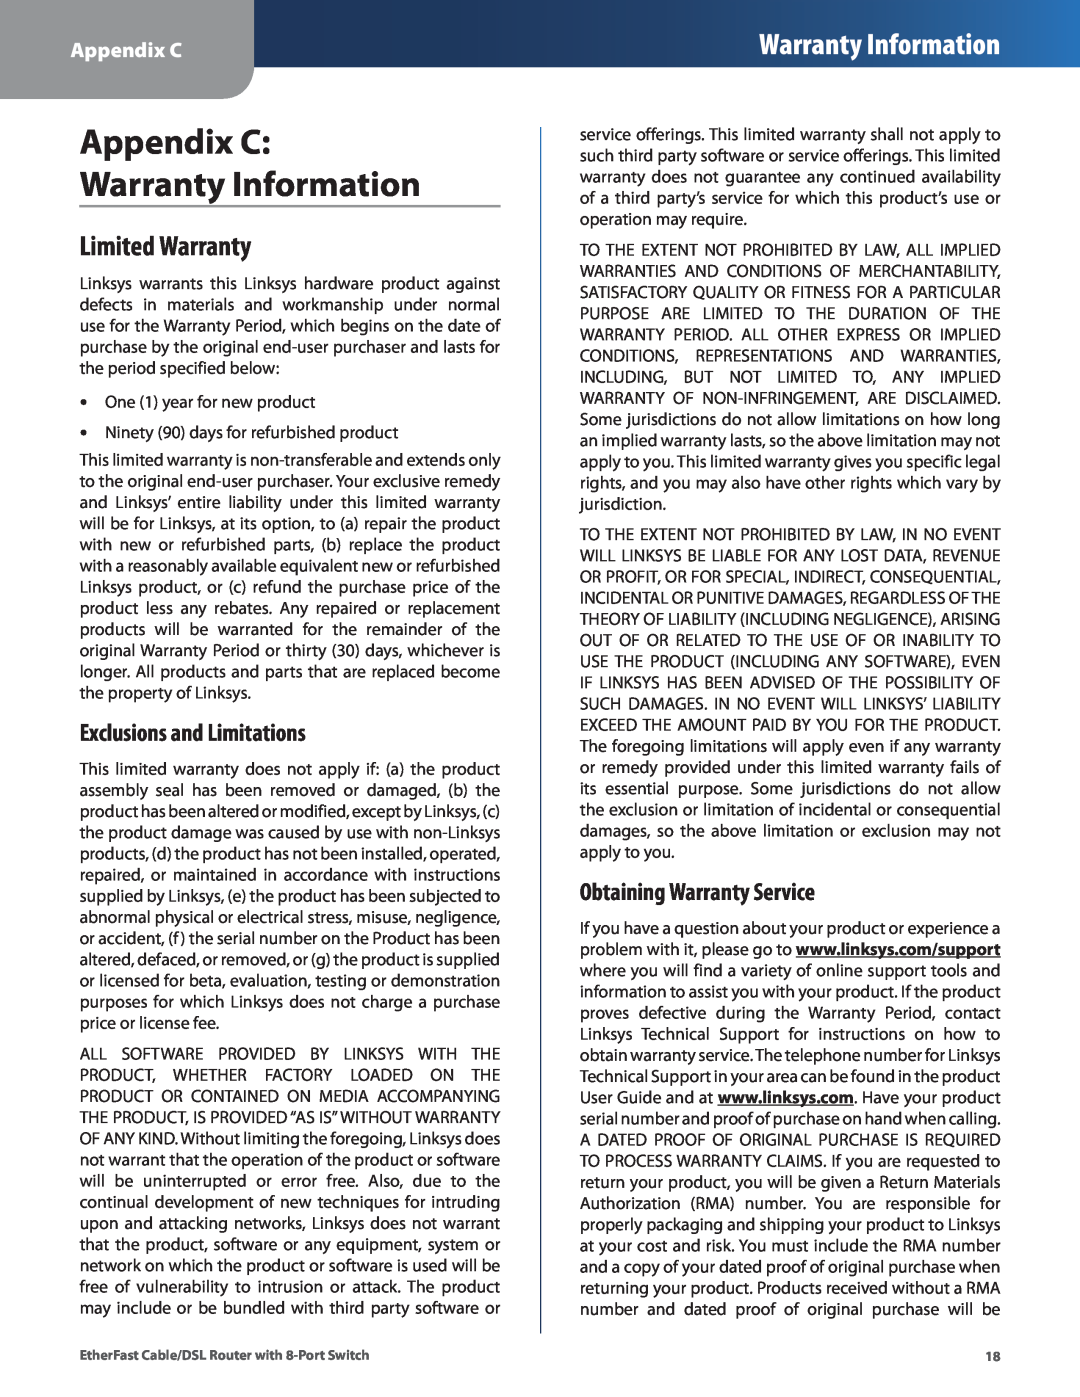 Cisco Systems BEFSR81 manual Appendix C Warranty Information, Limited Warranty, Exclusions and Limitations 